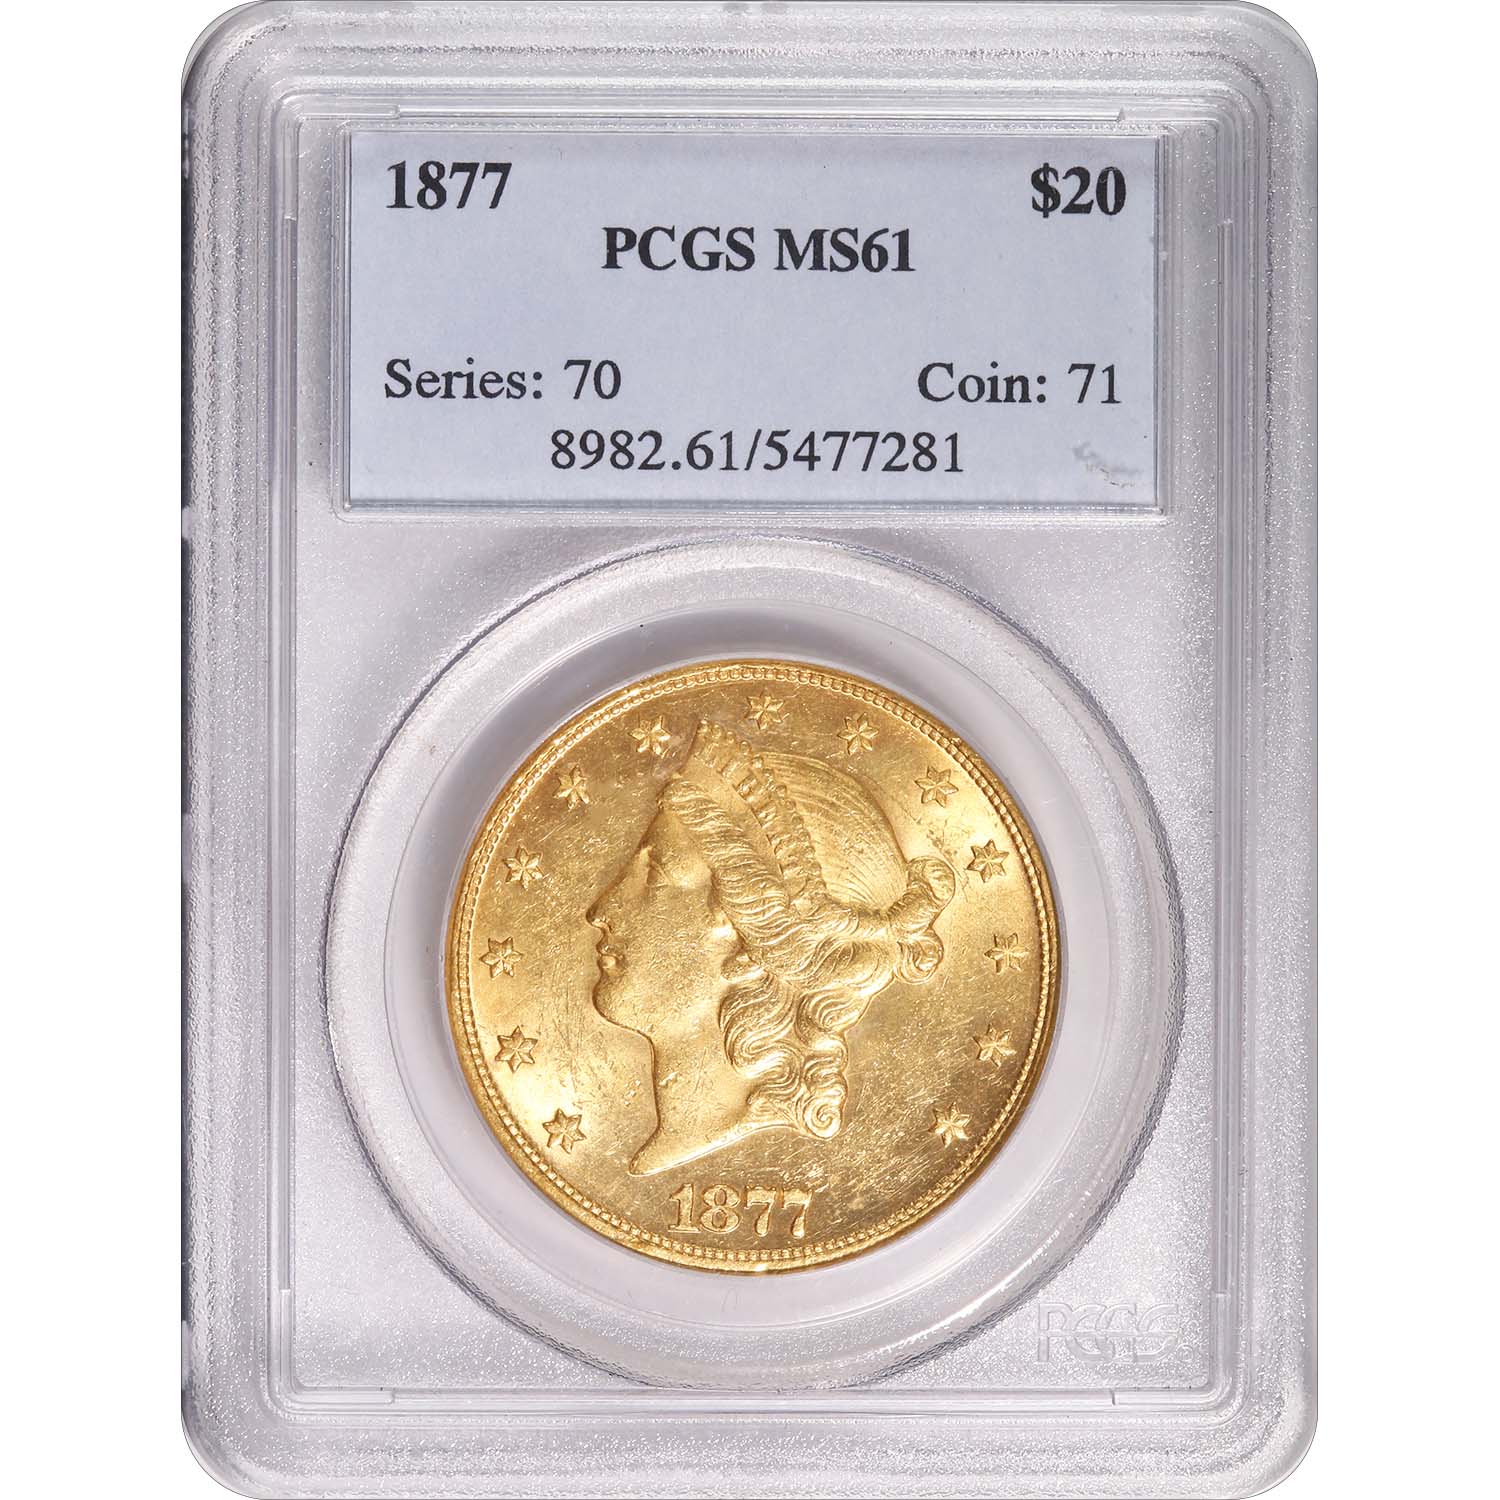 Certified $20 Gold Liberty 1877 MS61 PCGS